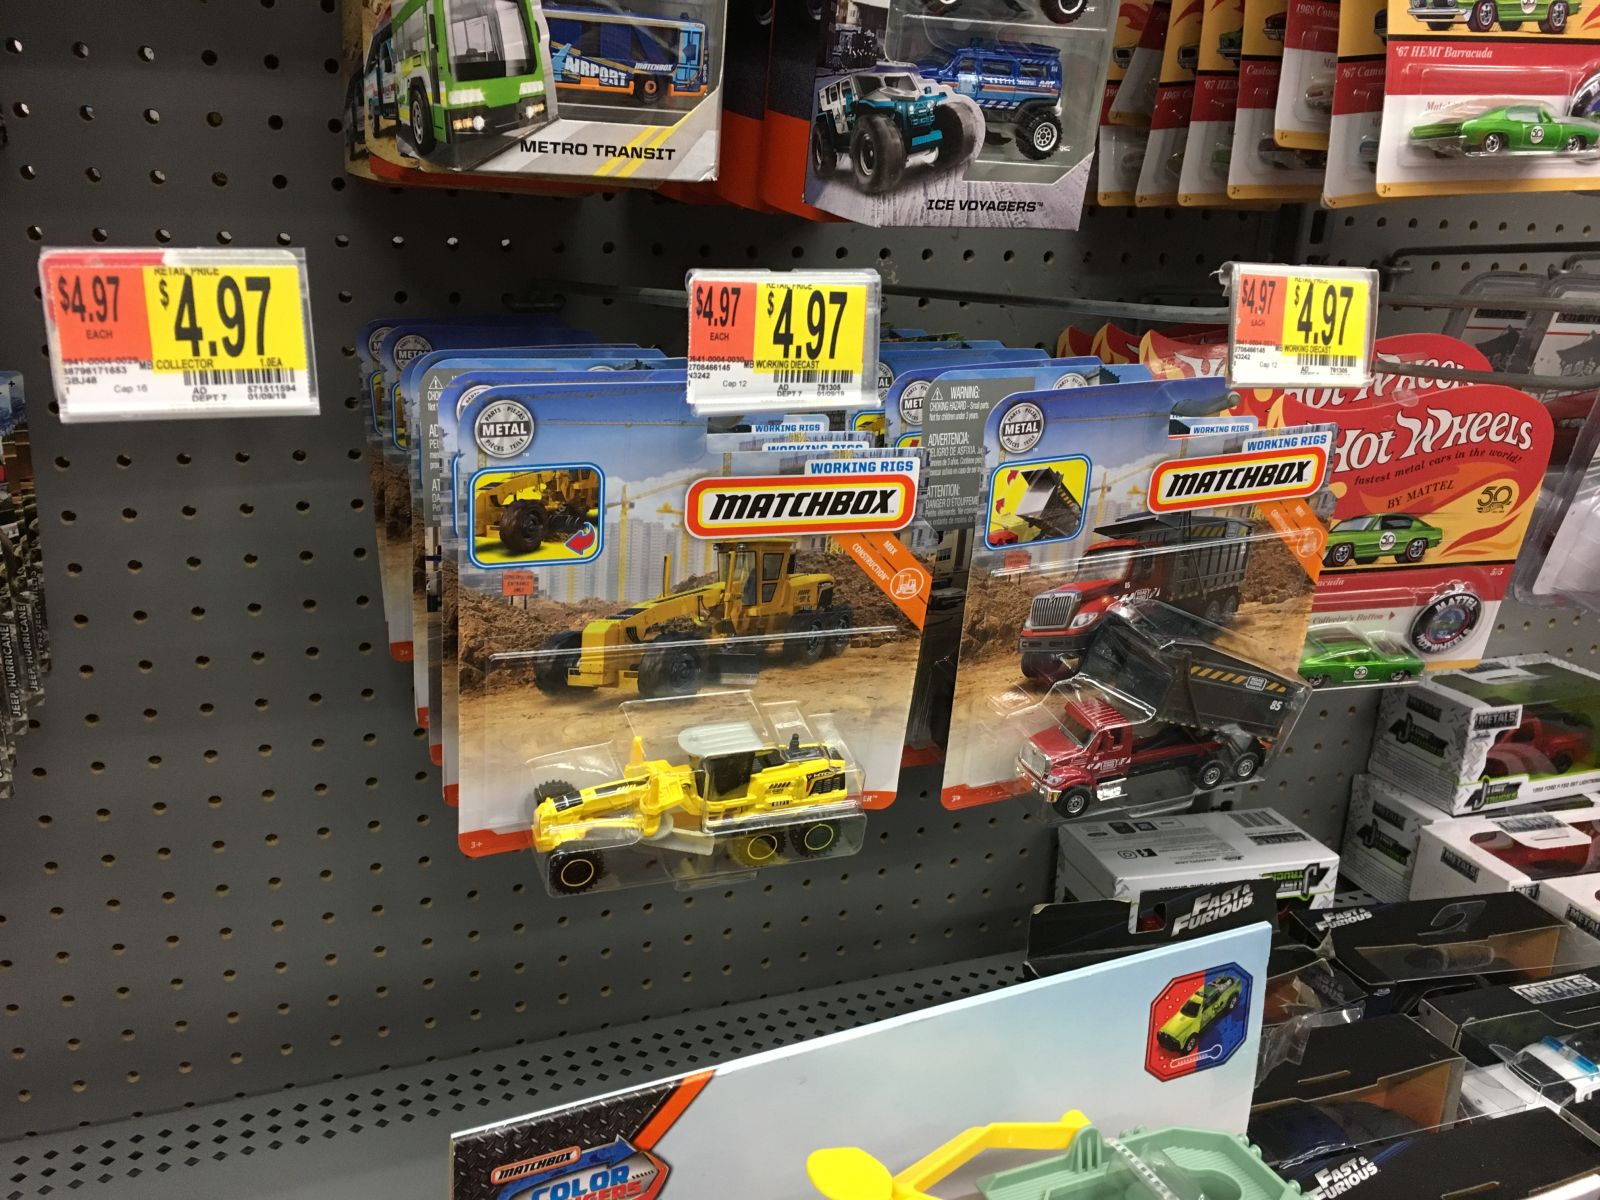 I noticed two Wally-World’s are carrying the Working Rigs